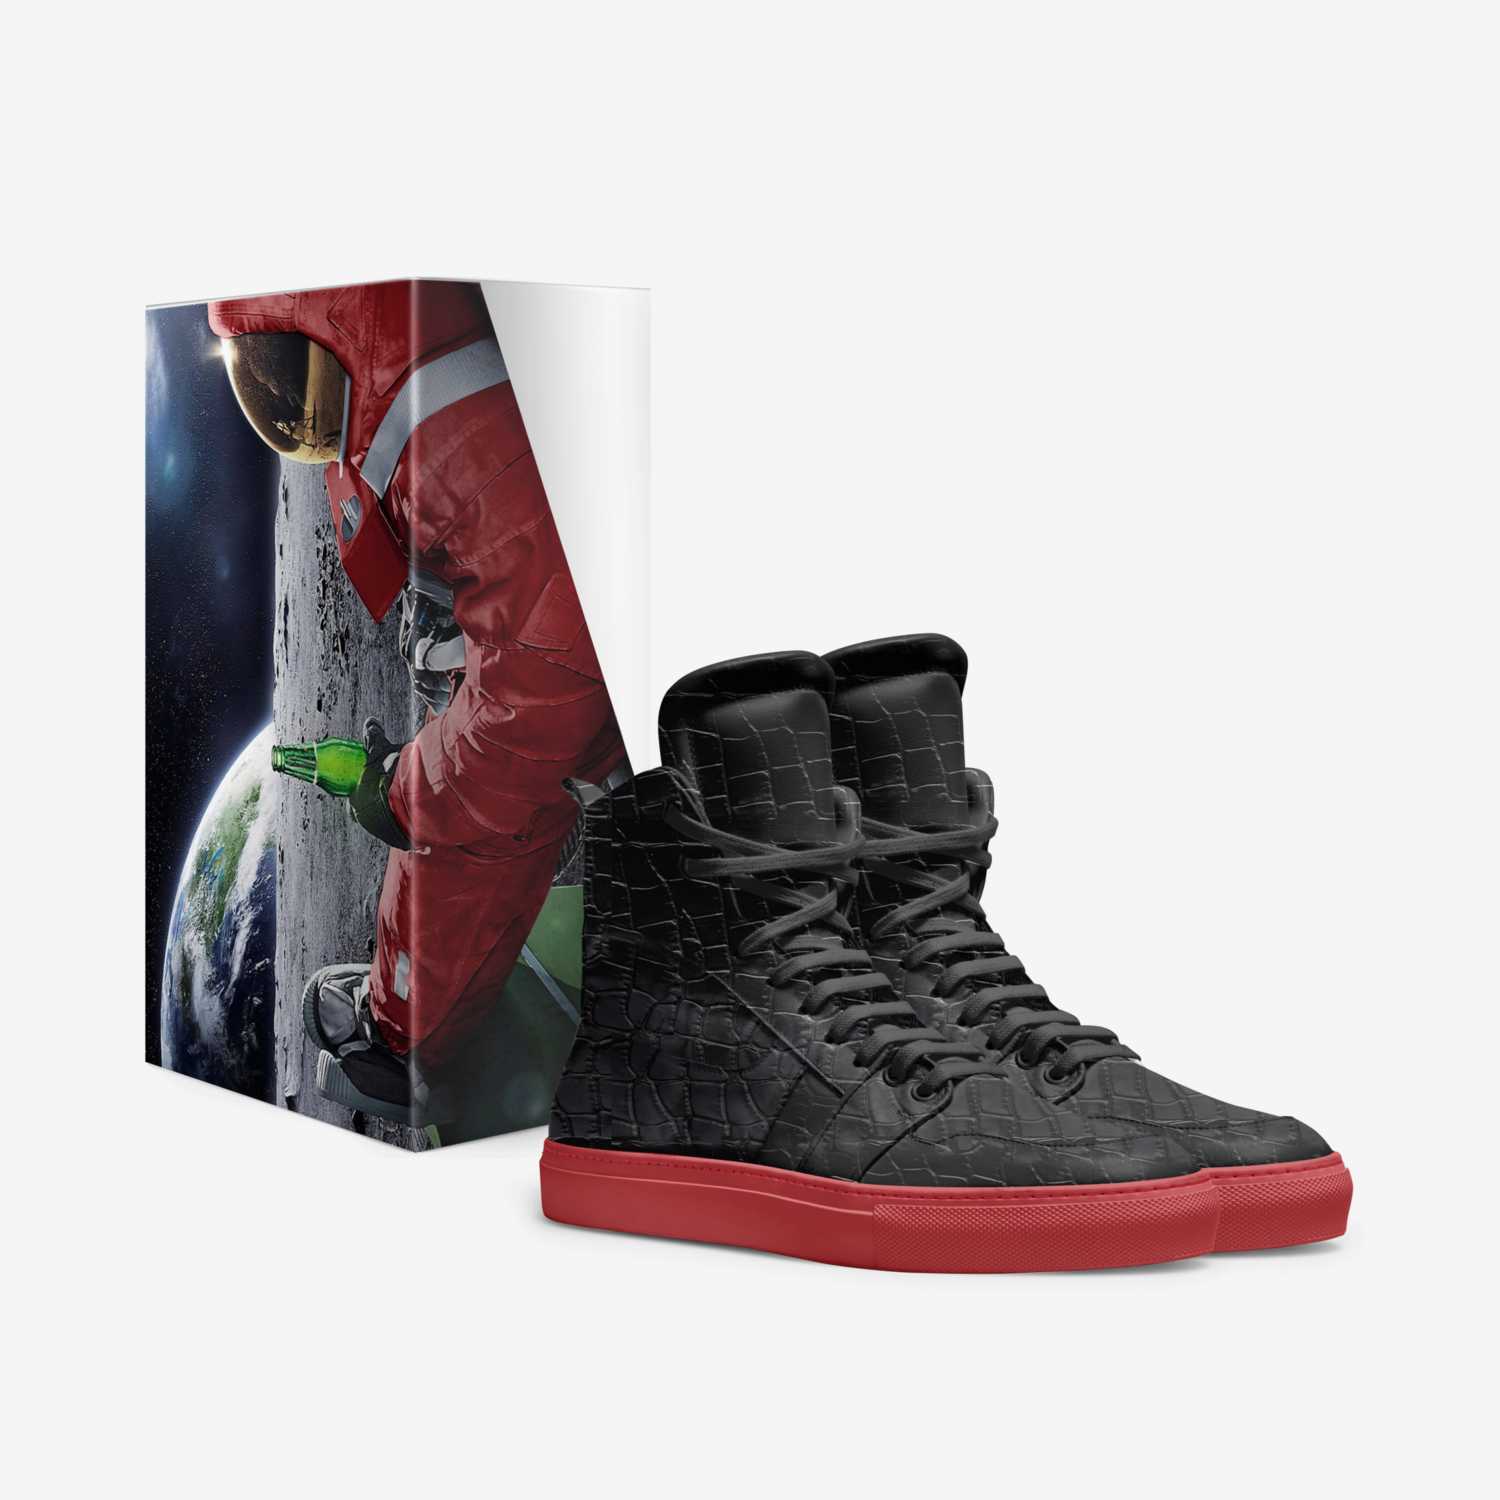 Juice Skywalker 1 custom made in Italy shoes by Beverly Wills | Box view